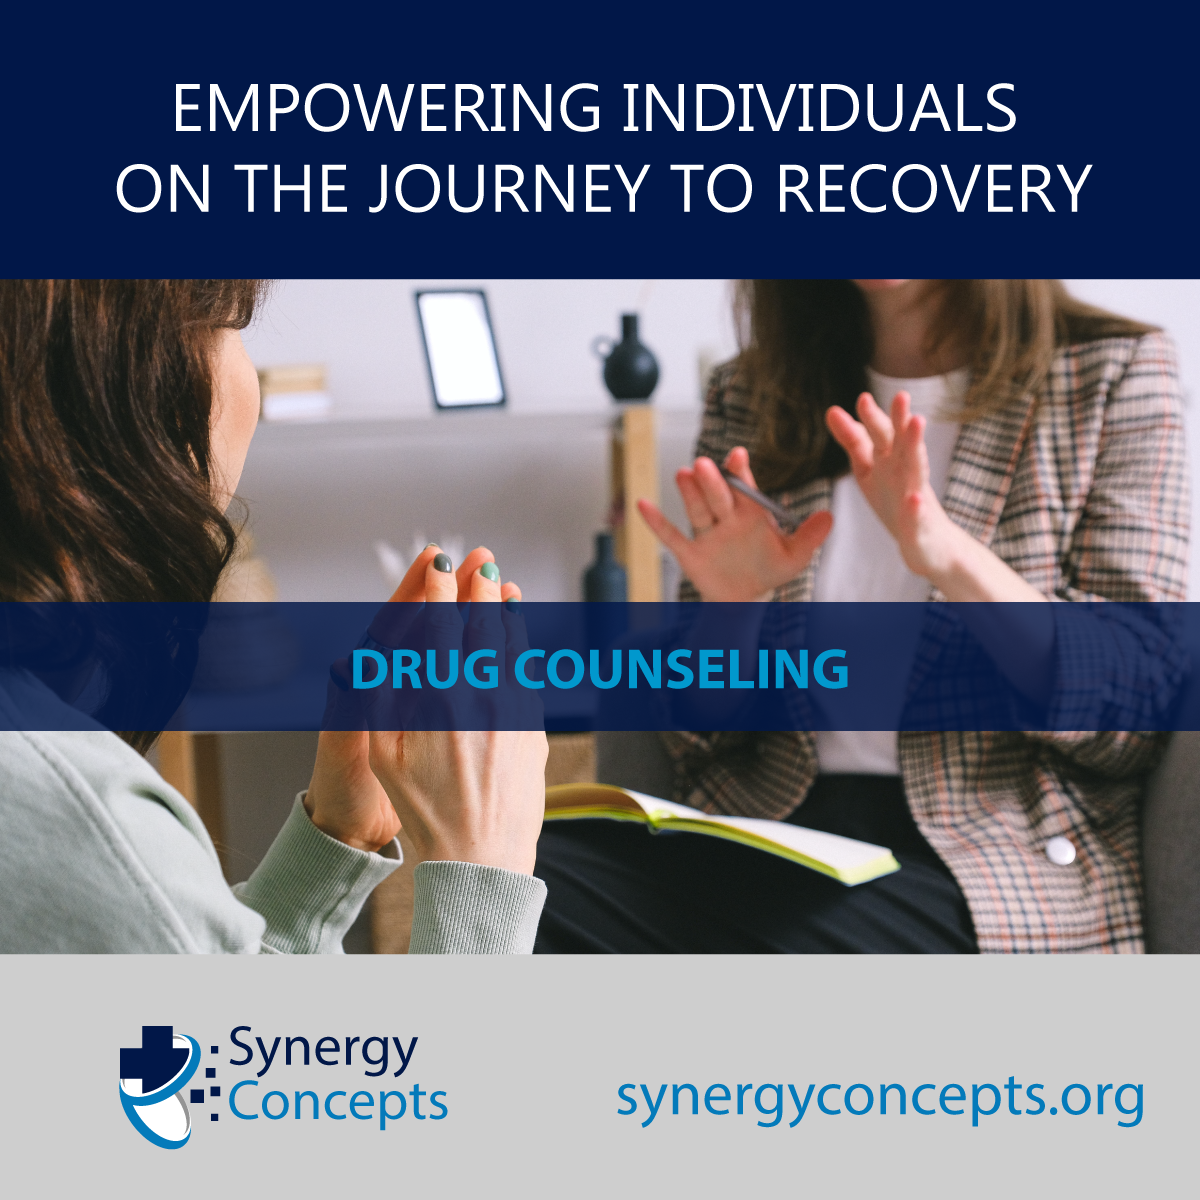 Drug Counseling: Empowering Individuals on the Journey to Recovery